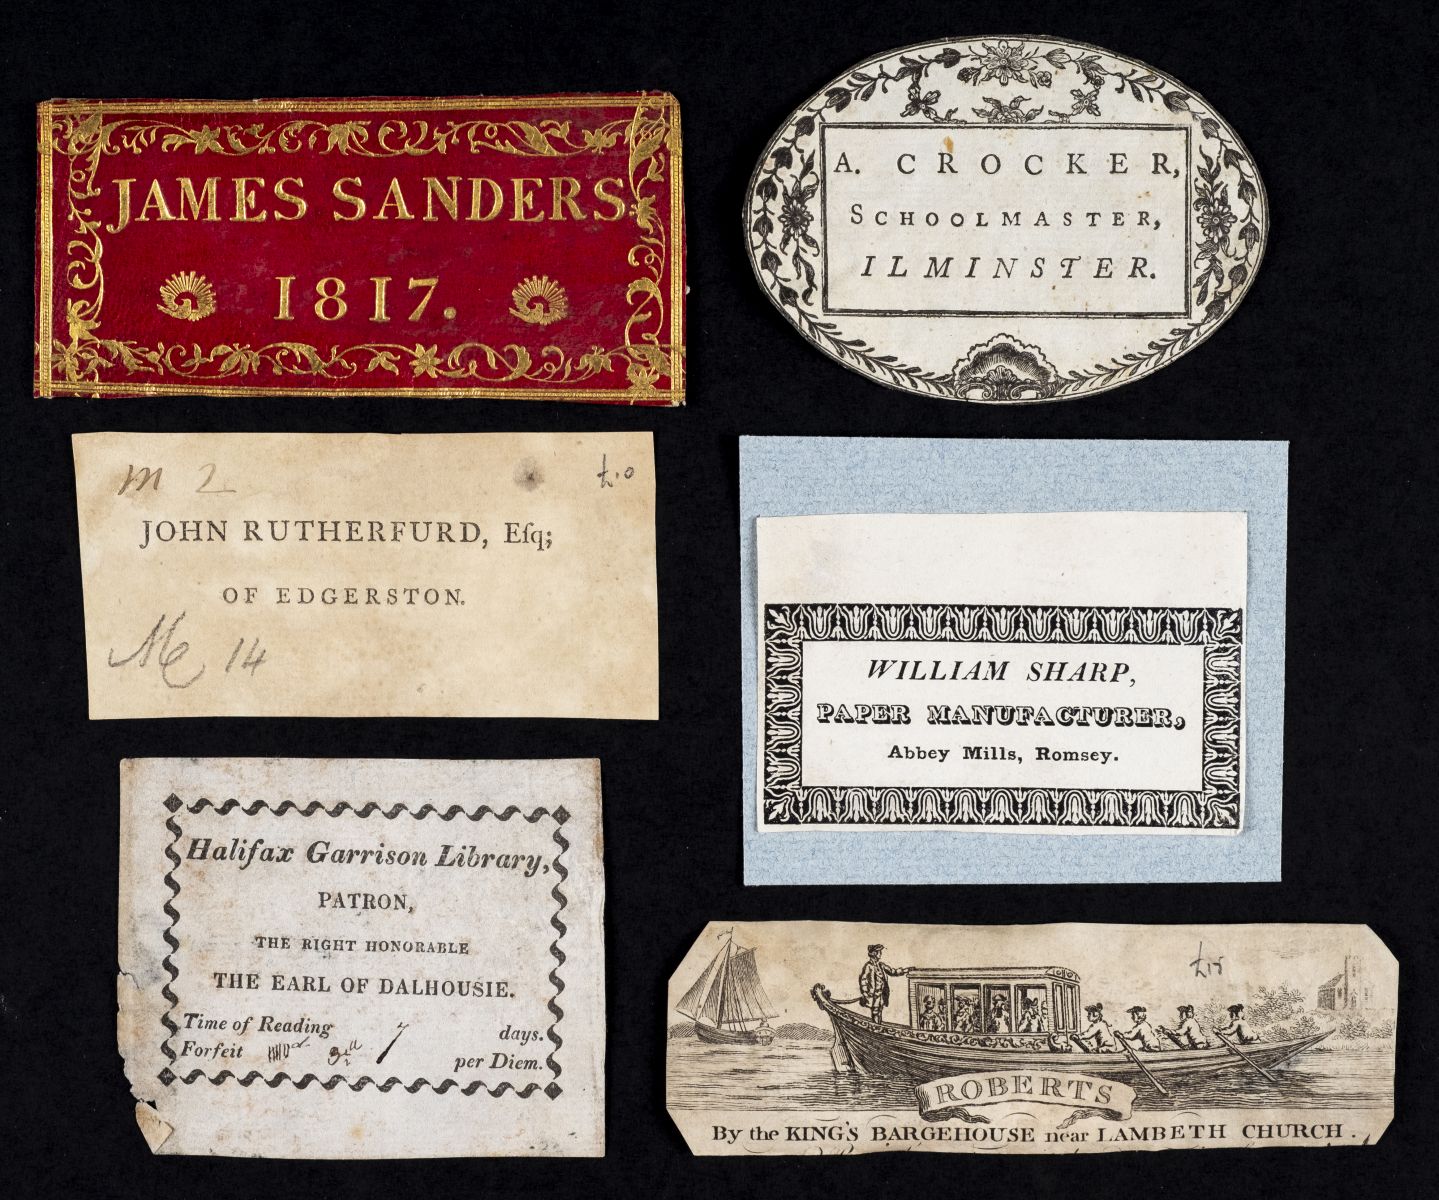 * Bookplates & labels. A collection of 30 bookplates and ownership labels, 18th & 19th century